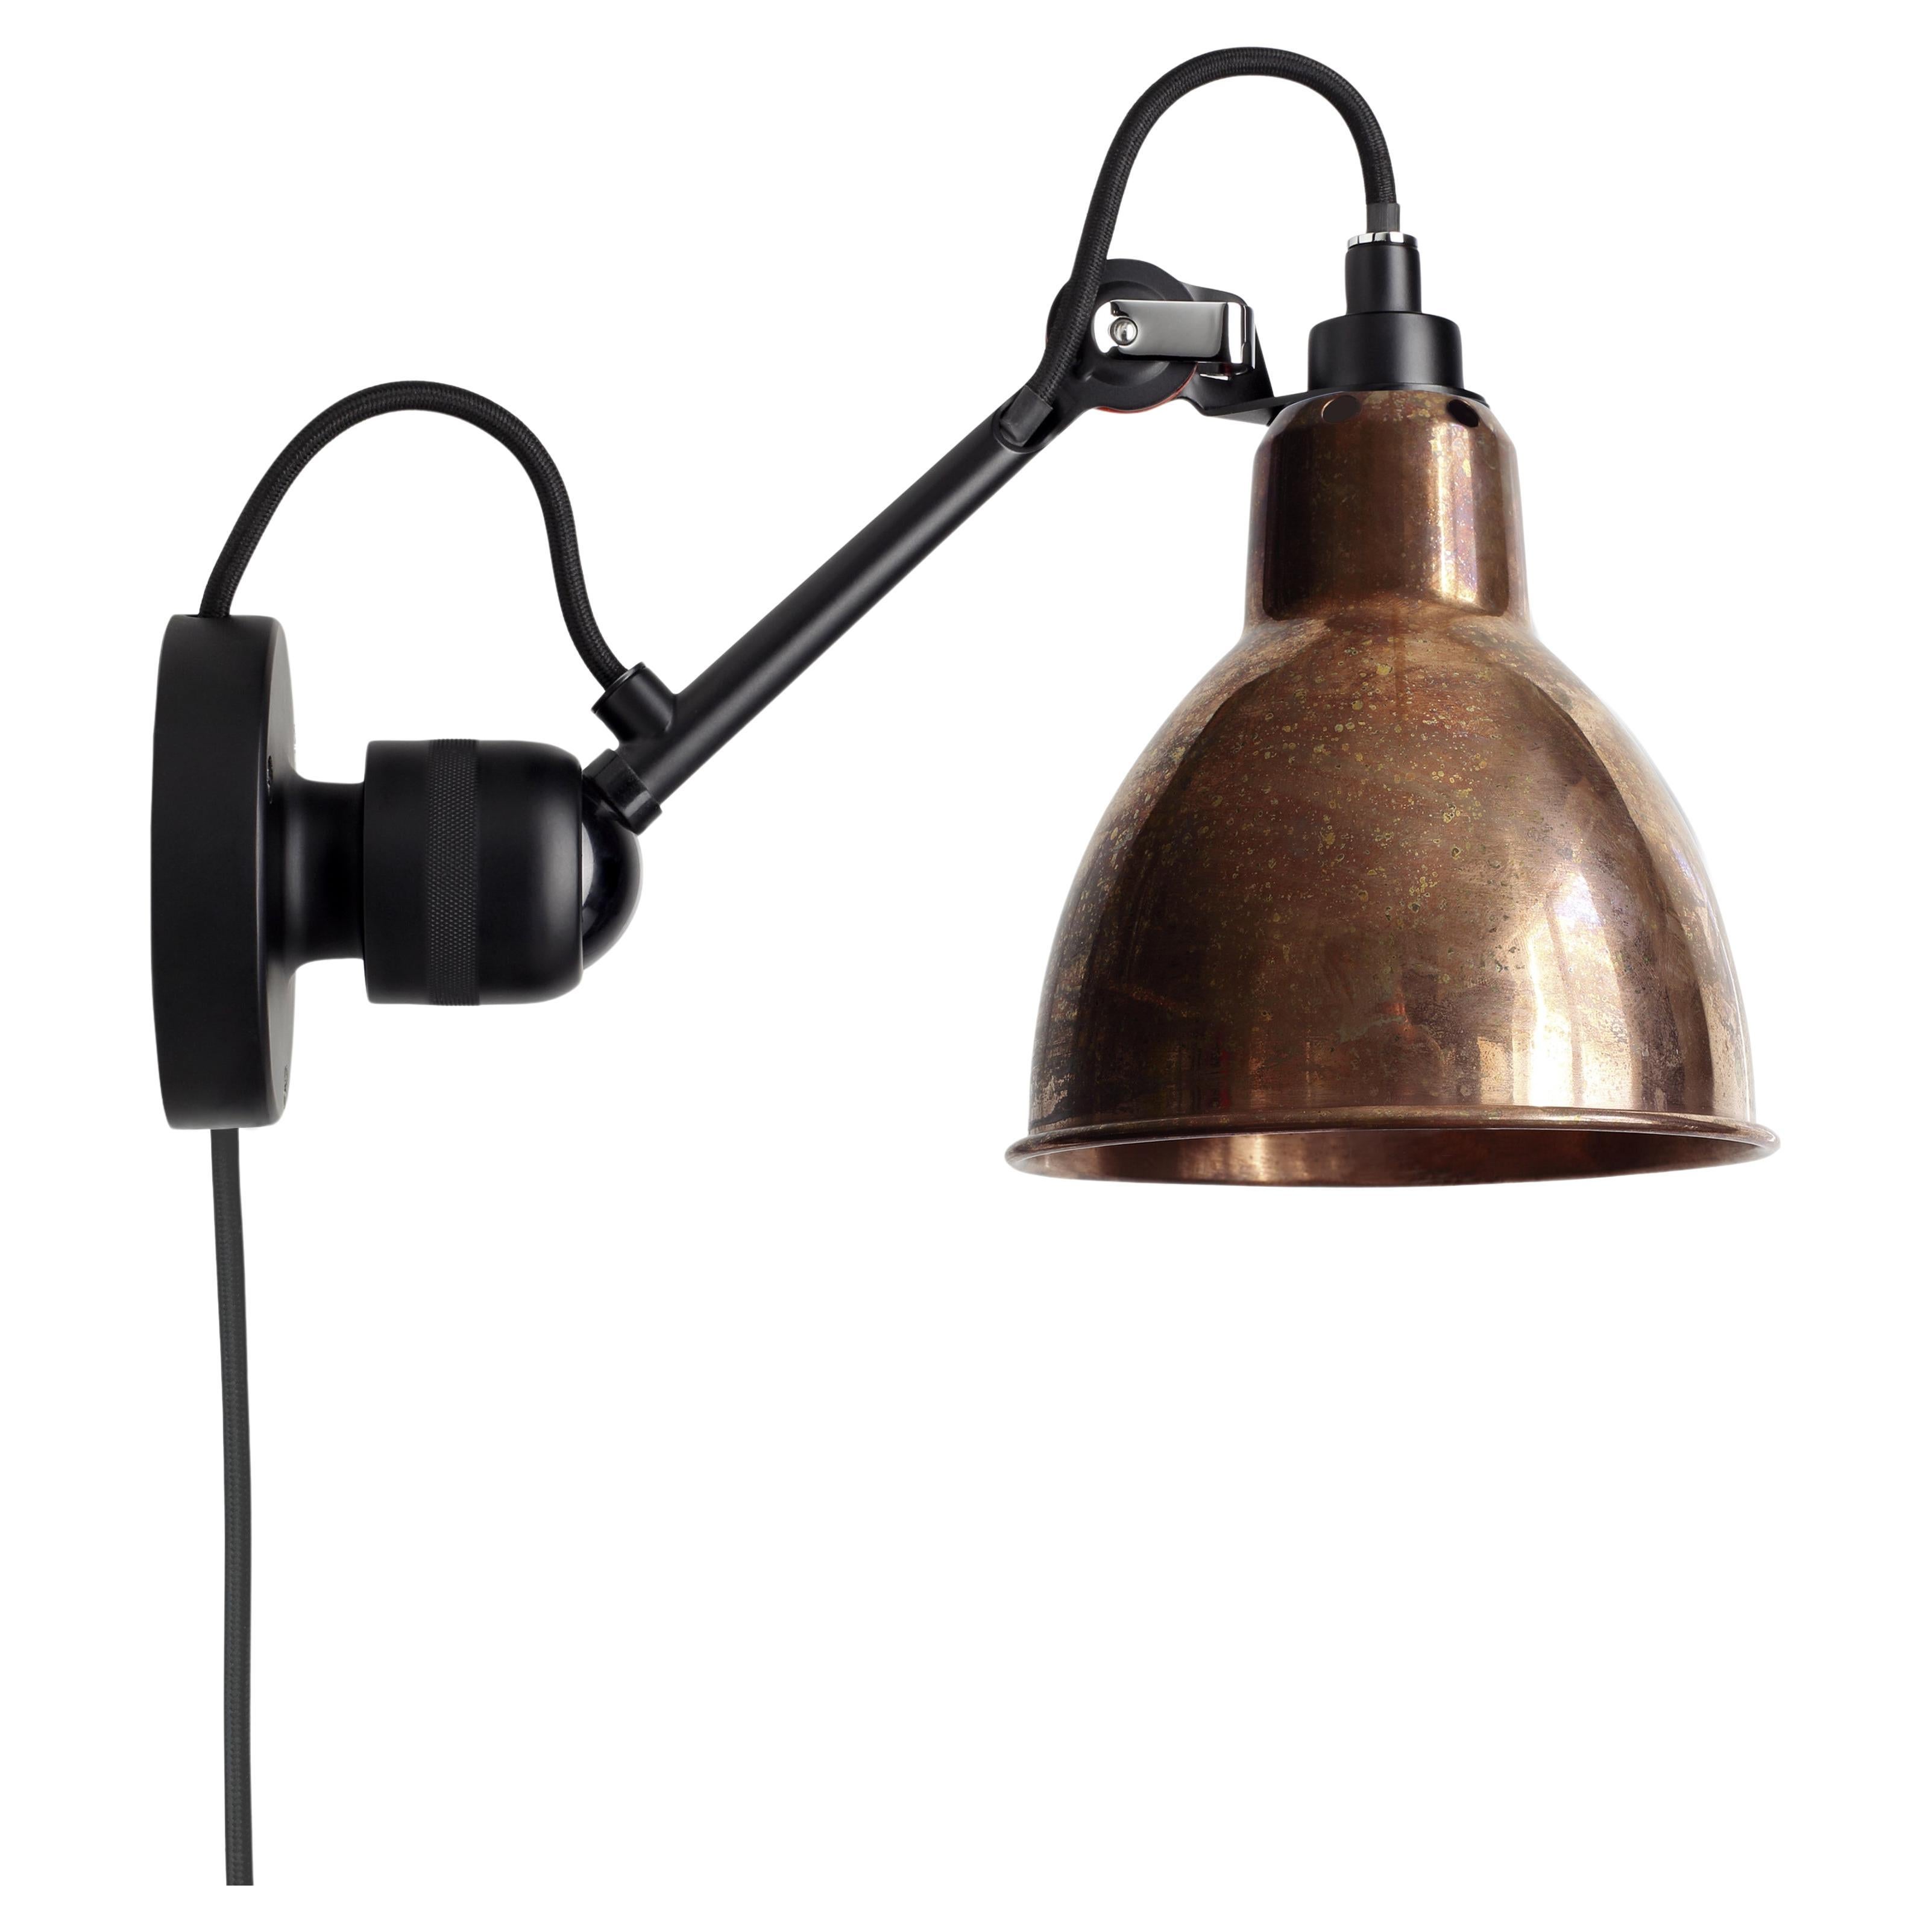 DCW Editions La Lampe Gras N°304 CA Wall Lamp in Black Arm and Raw Copper Shade